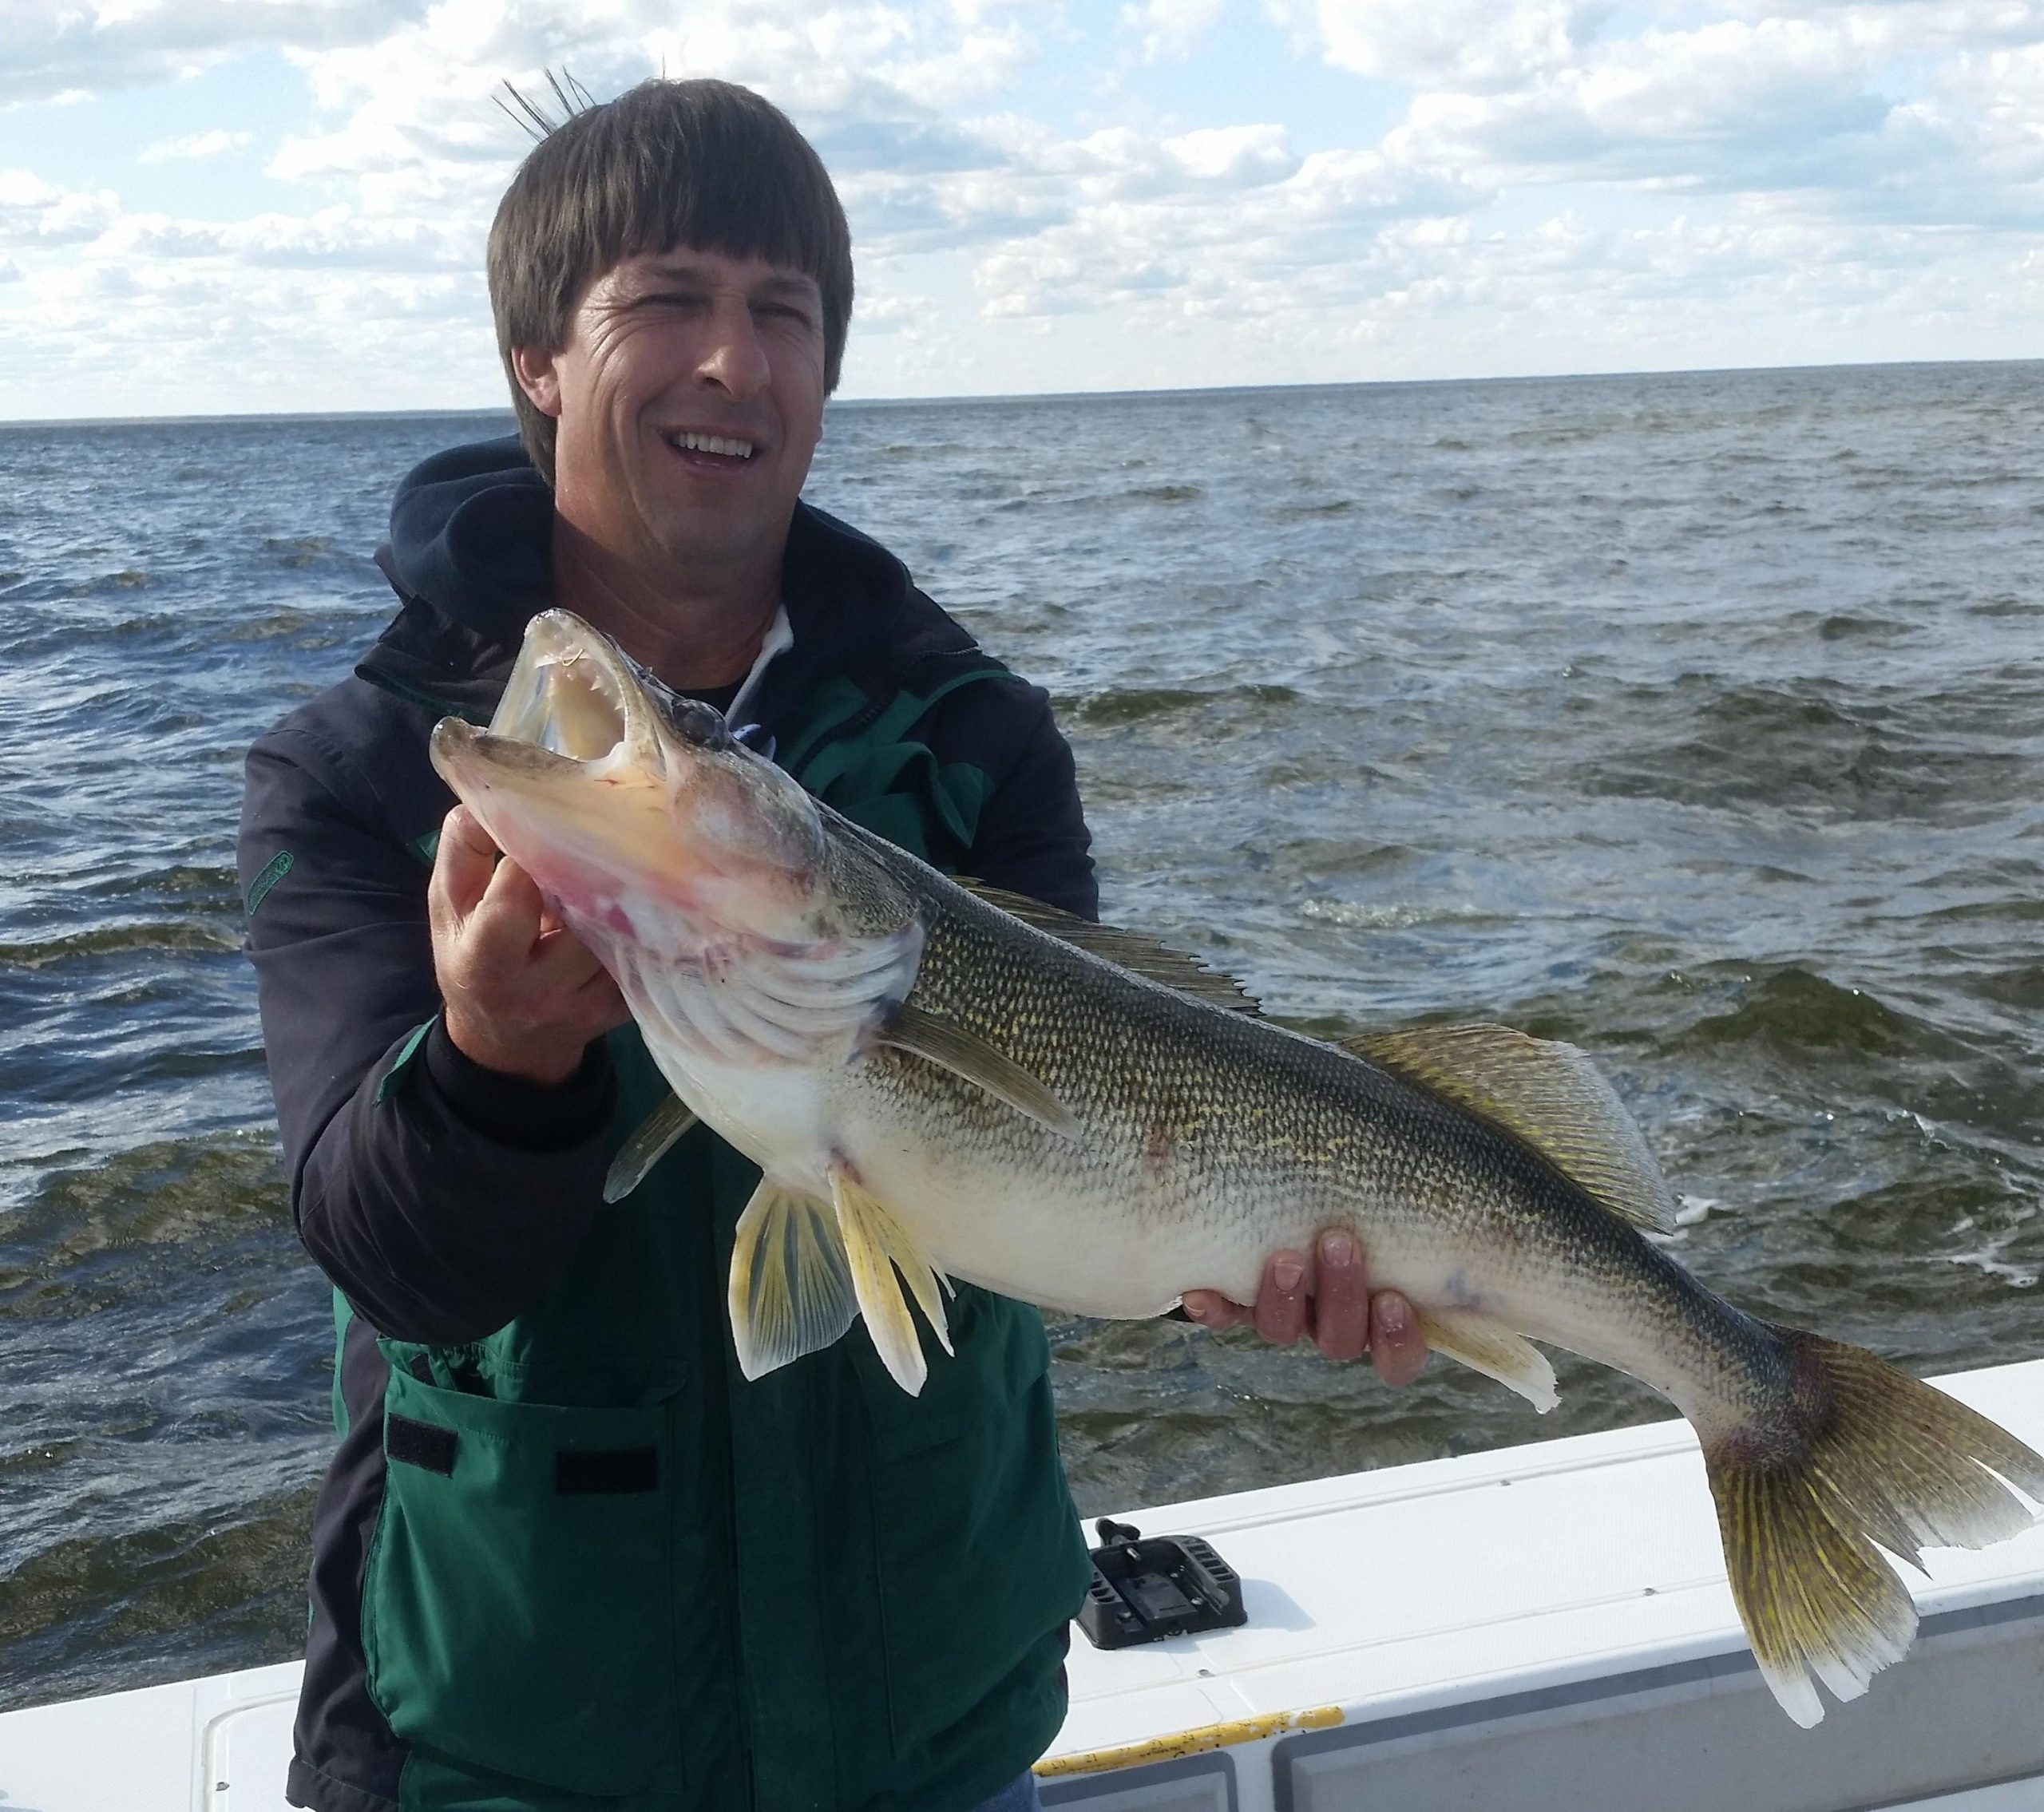 Monster Walleye Caught on Midwest Outdoors TV - Lake of the Woods